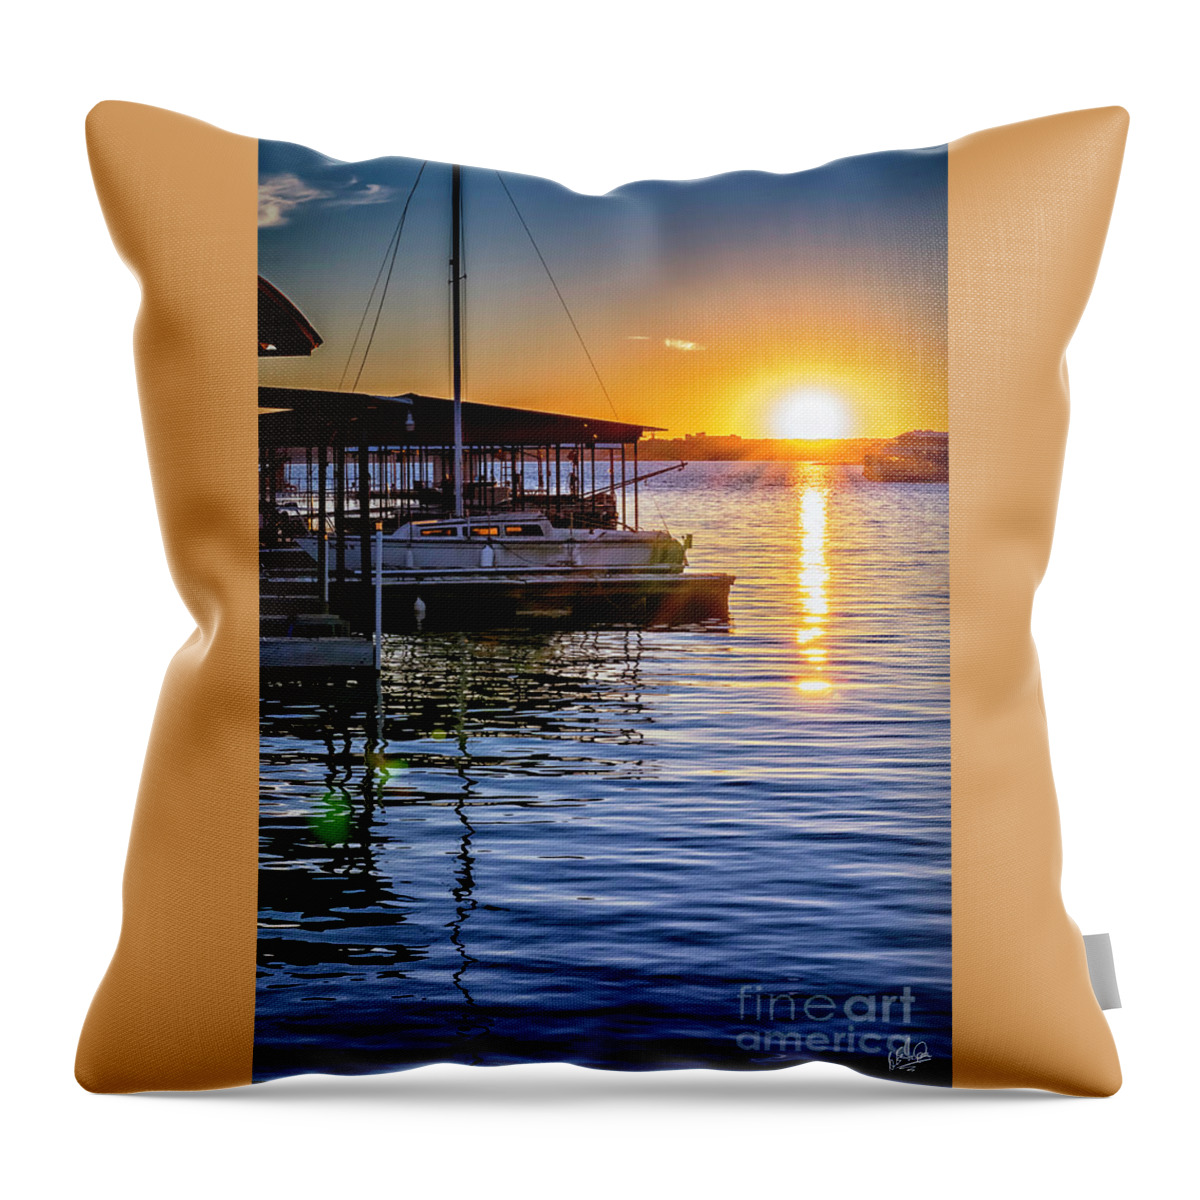  Throw Pillow featuring the photograph Lake Travis by Walt Foegelle